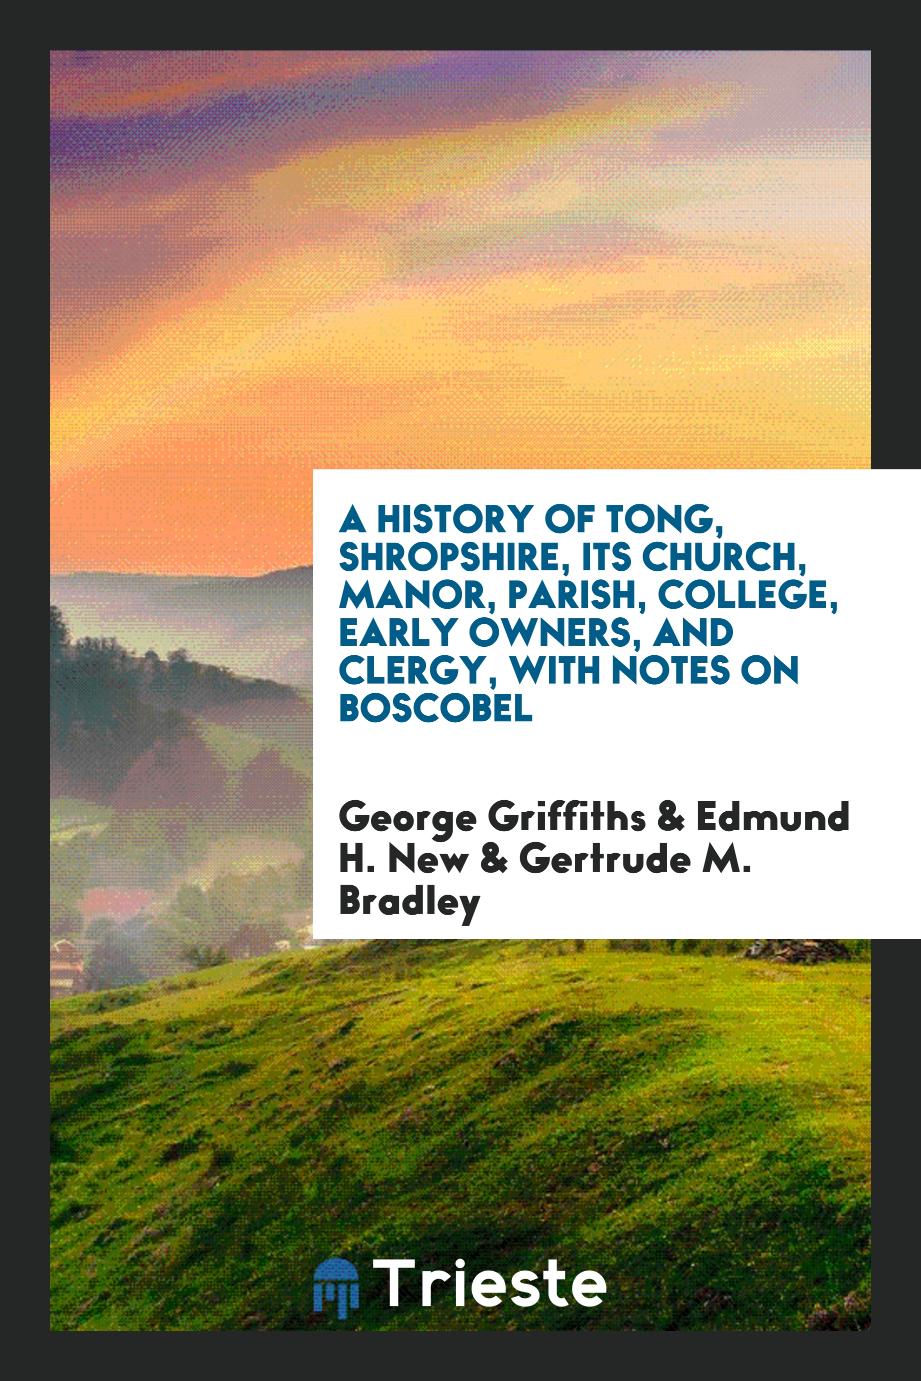 A History of Tong, Shropshire, Its Church, Manor, Parish, College, Early Owners, and Clergy, with Notes on Boscobel